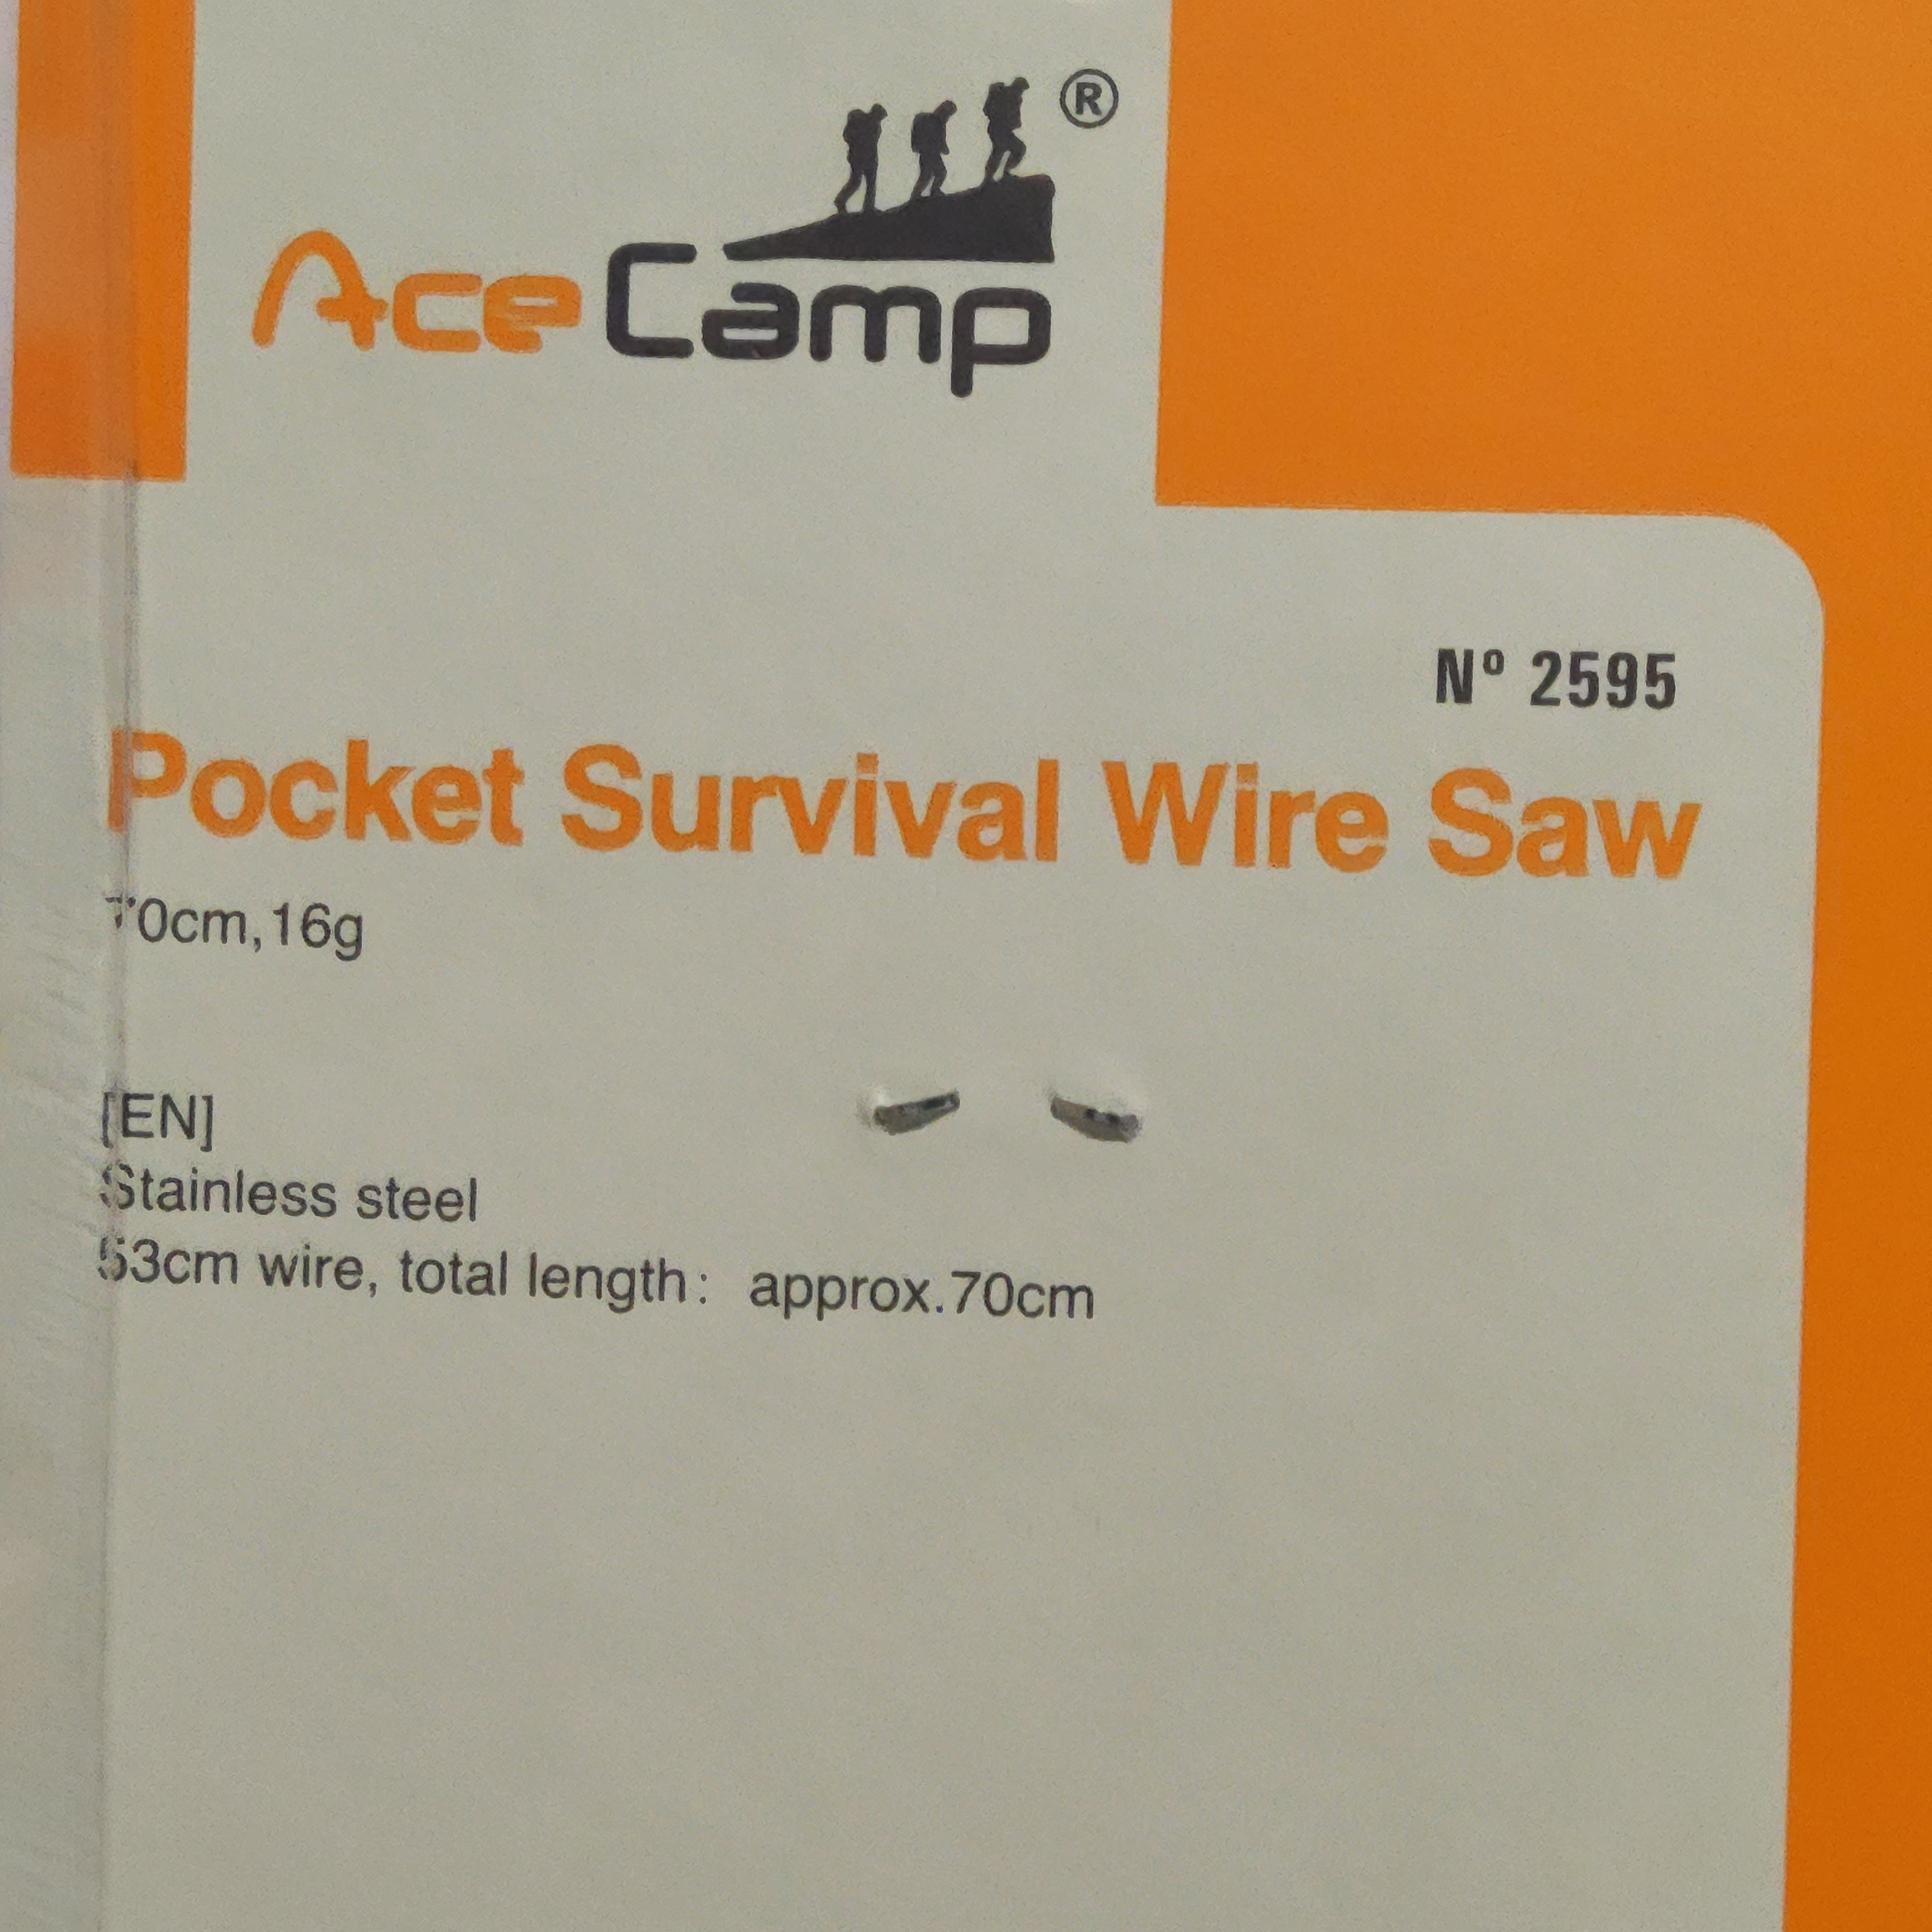 Ace Camp Pocket Survival Wire Saw #2595